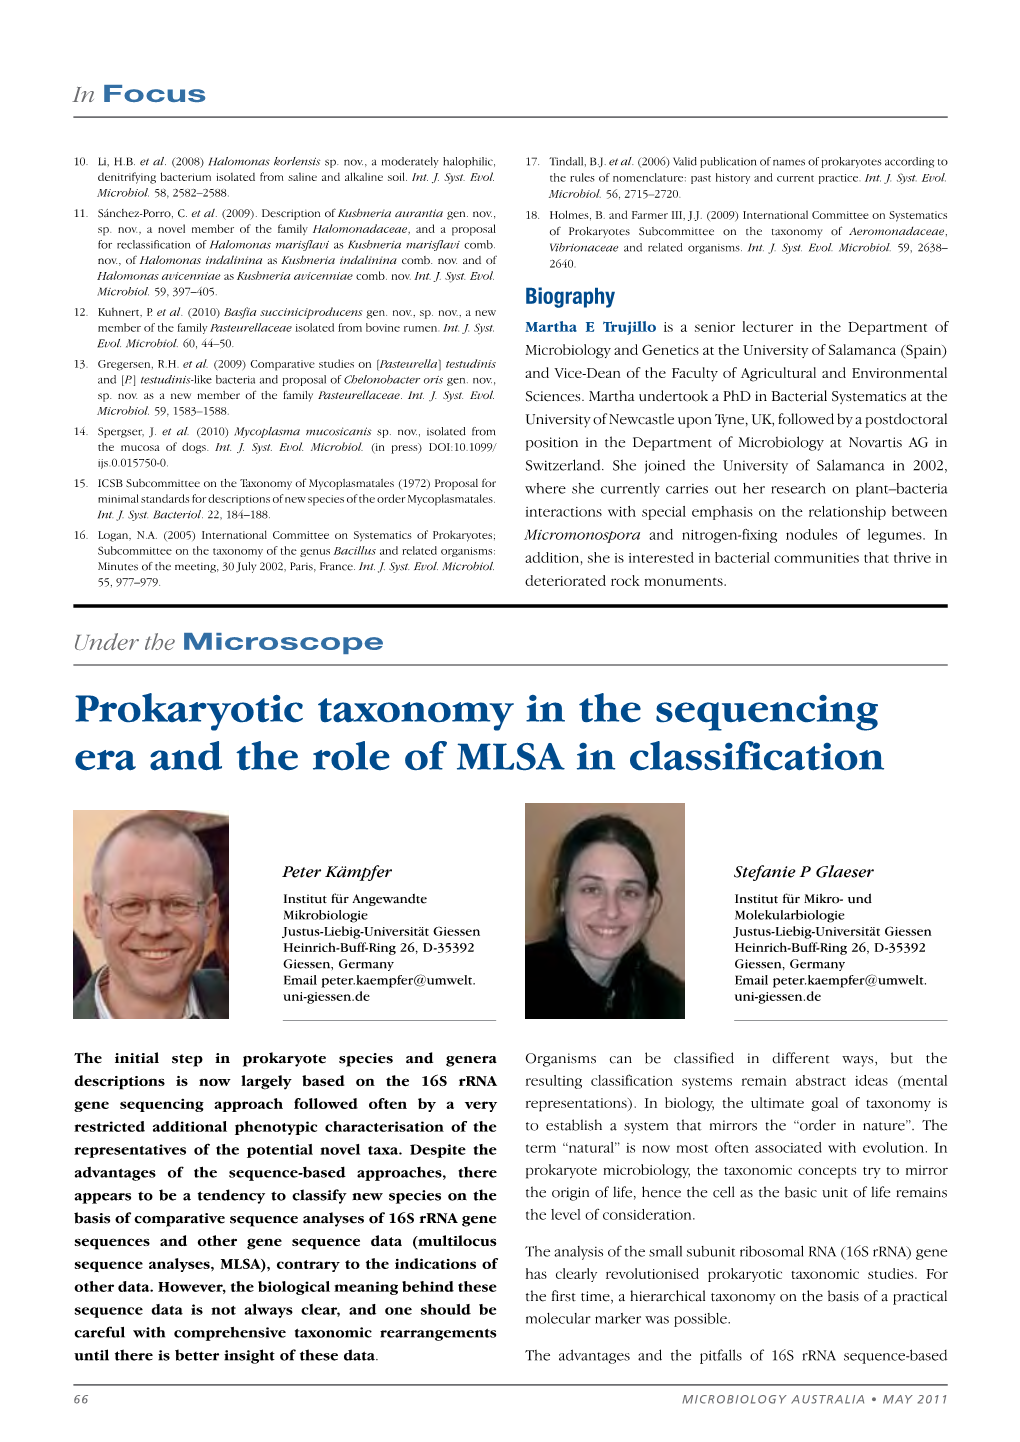 Prokaryotic Taxonomy in the Sequencing Era and the Role of MLSA in Classification